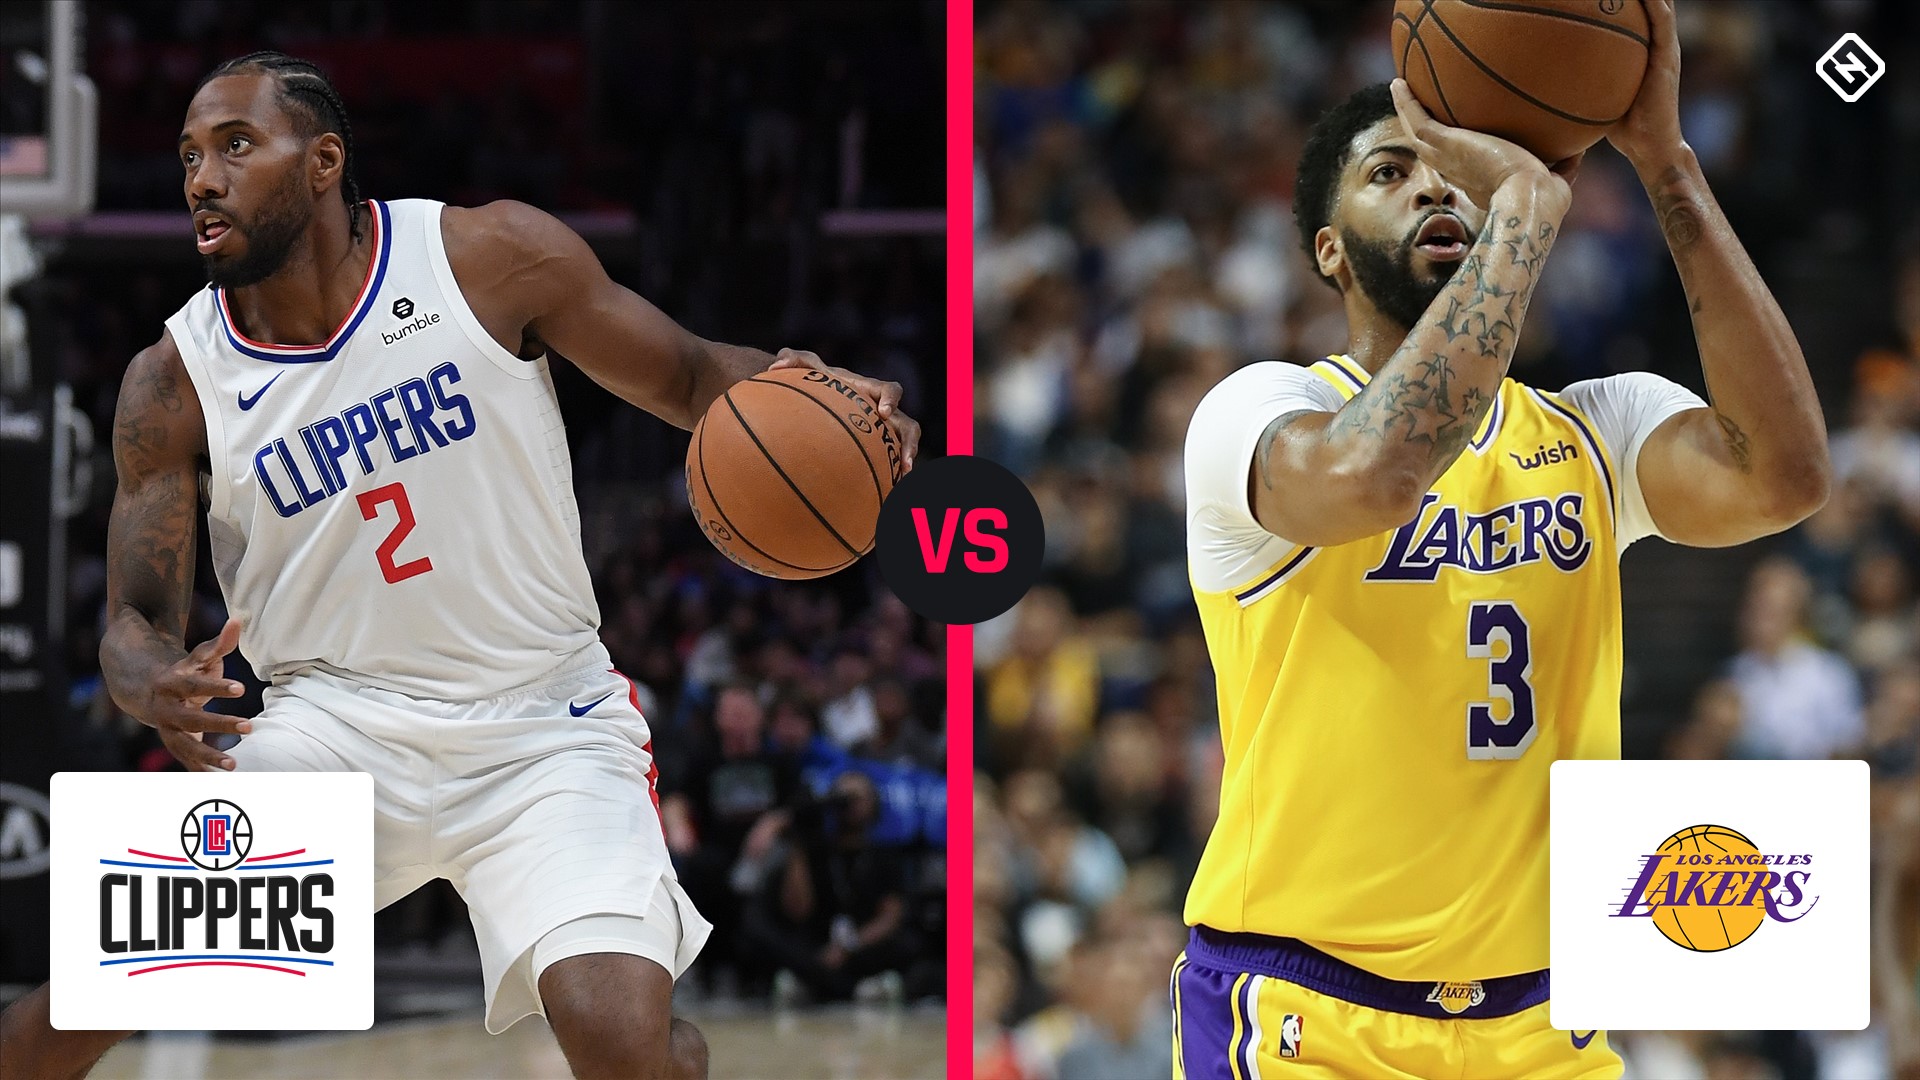 Lakers vs. Clippers: Live score, updates, highlights from NBA Tip-Off 2019 | Sporting News